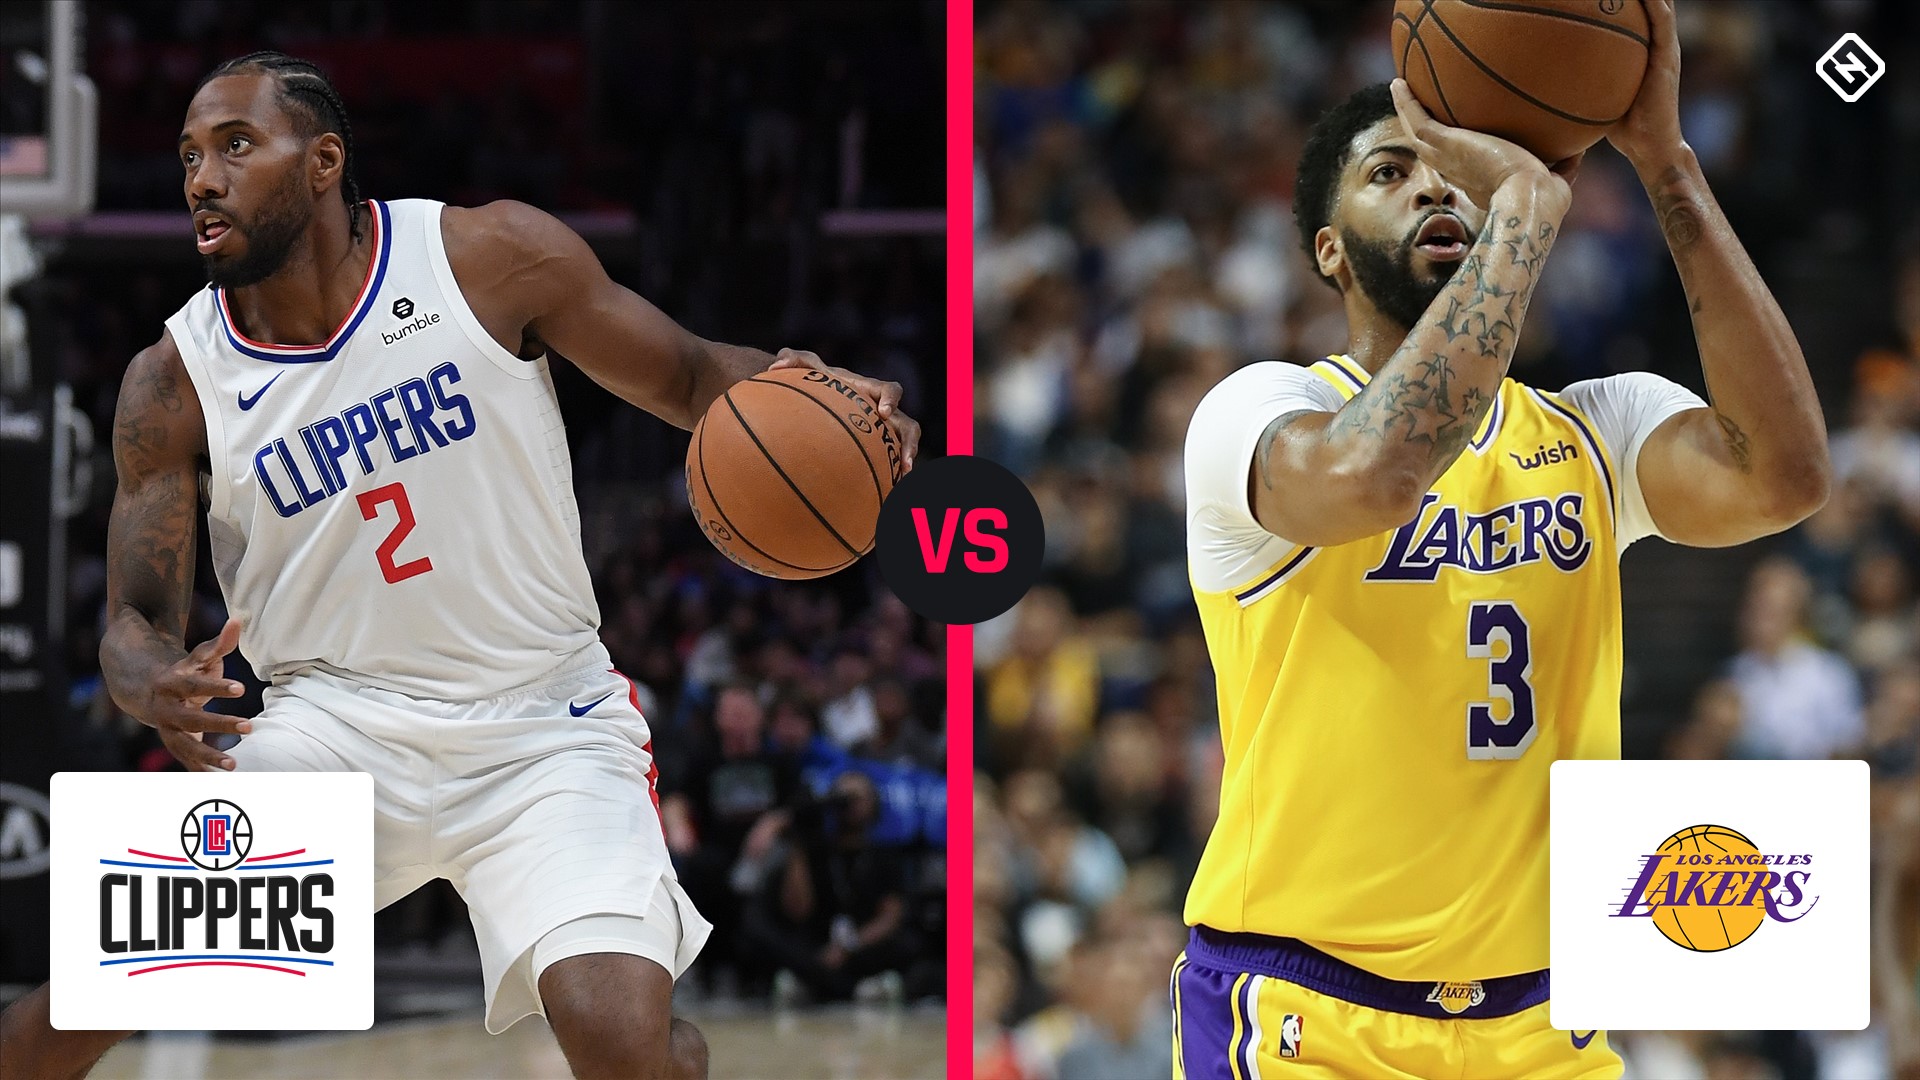 Lakers vs. Clippers: Live score, updates, highlights from NBA Tip-Off 2019 | Sporting News